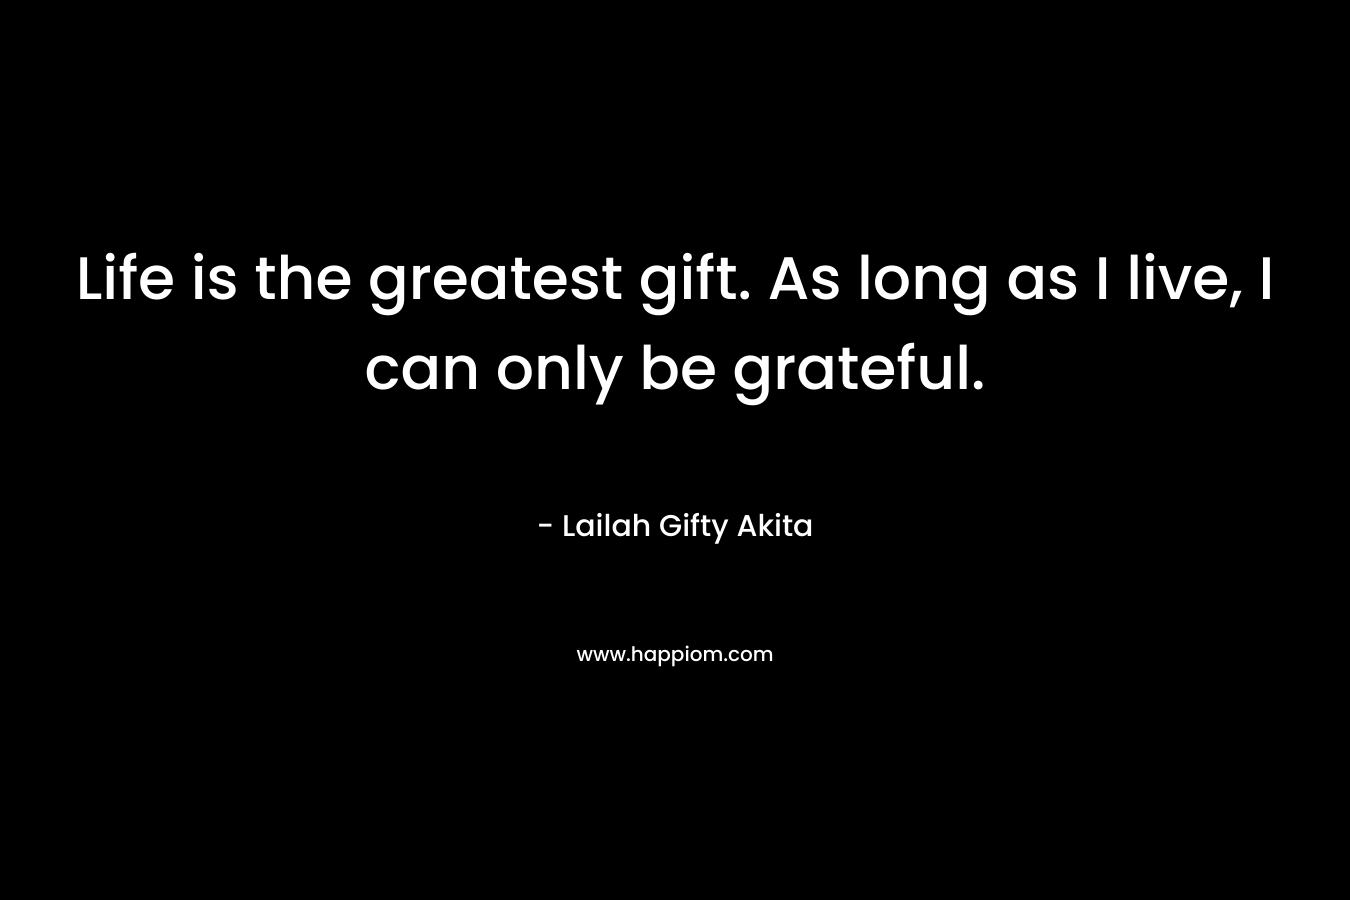 Life is the greatest gift. As long as I live, I can only be grateful.